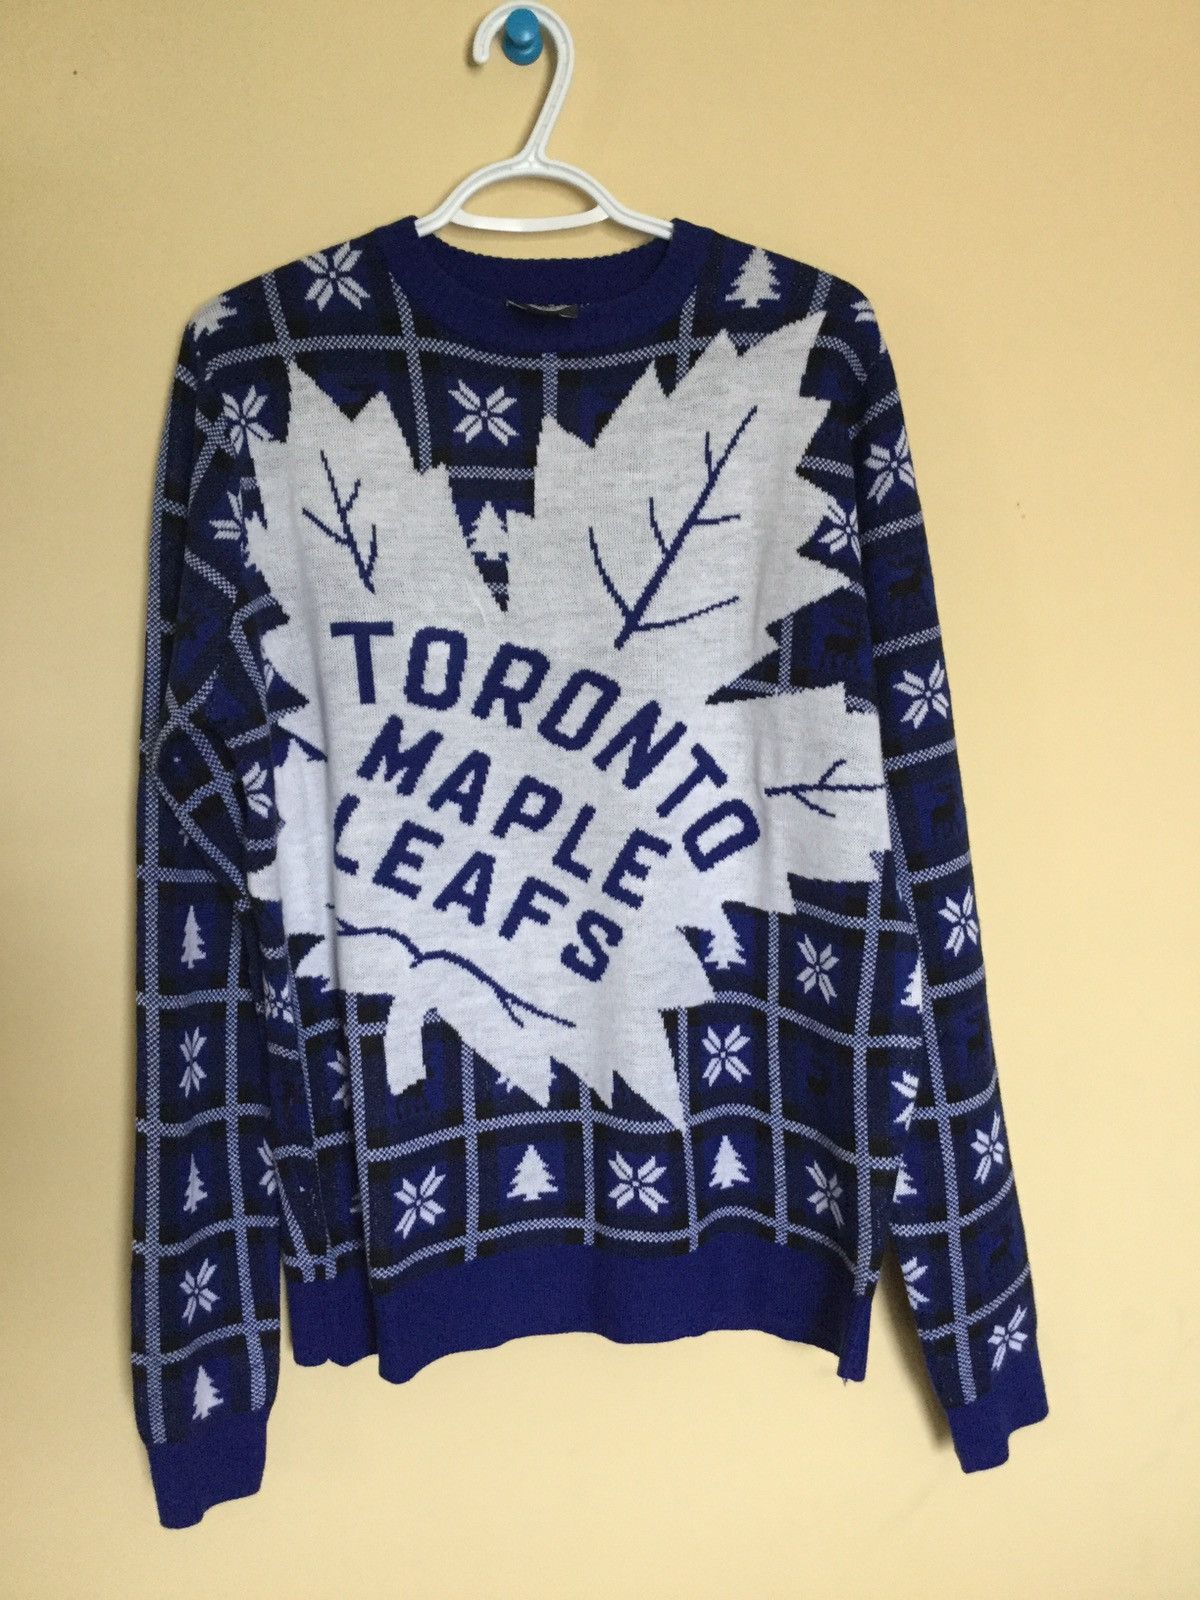 Toronto Maple Leafs on X: The @RealSports #TMLtalk TOTN prize is a #Leafs  ugly x-mas sweater  (players not included)   / X